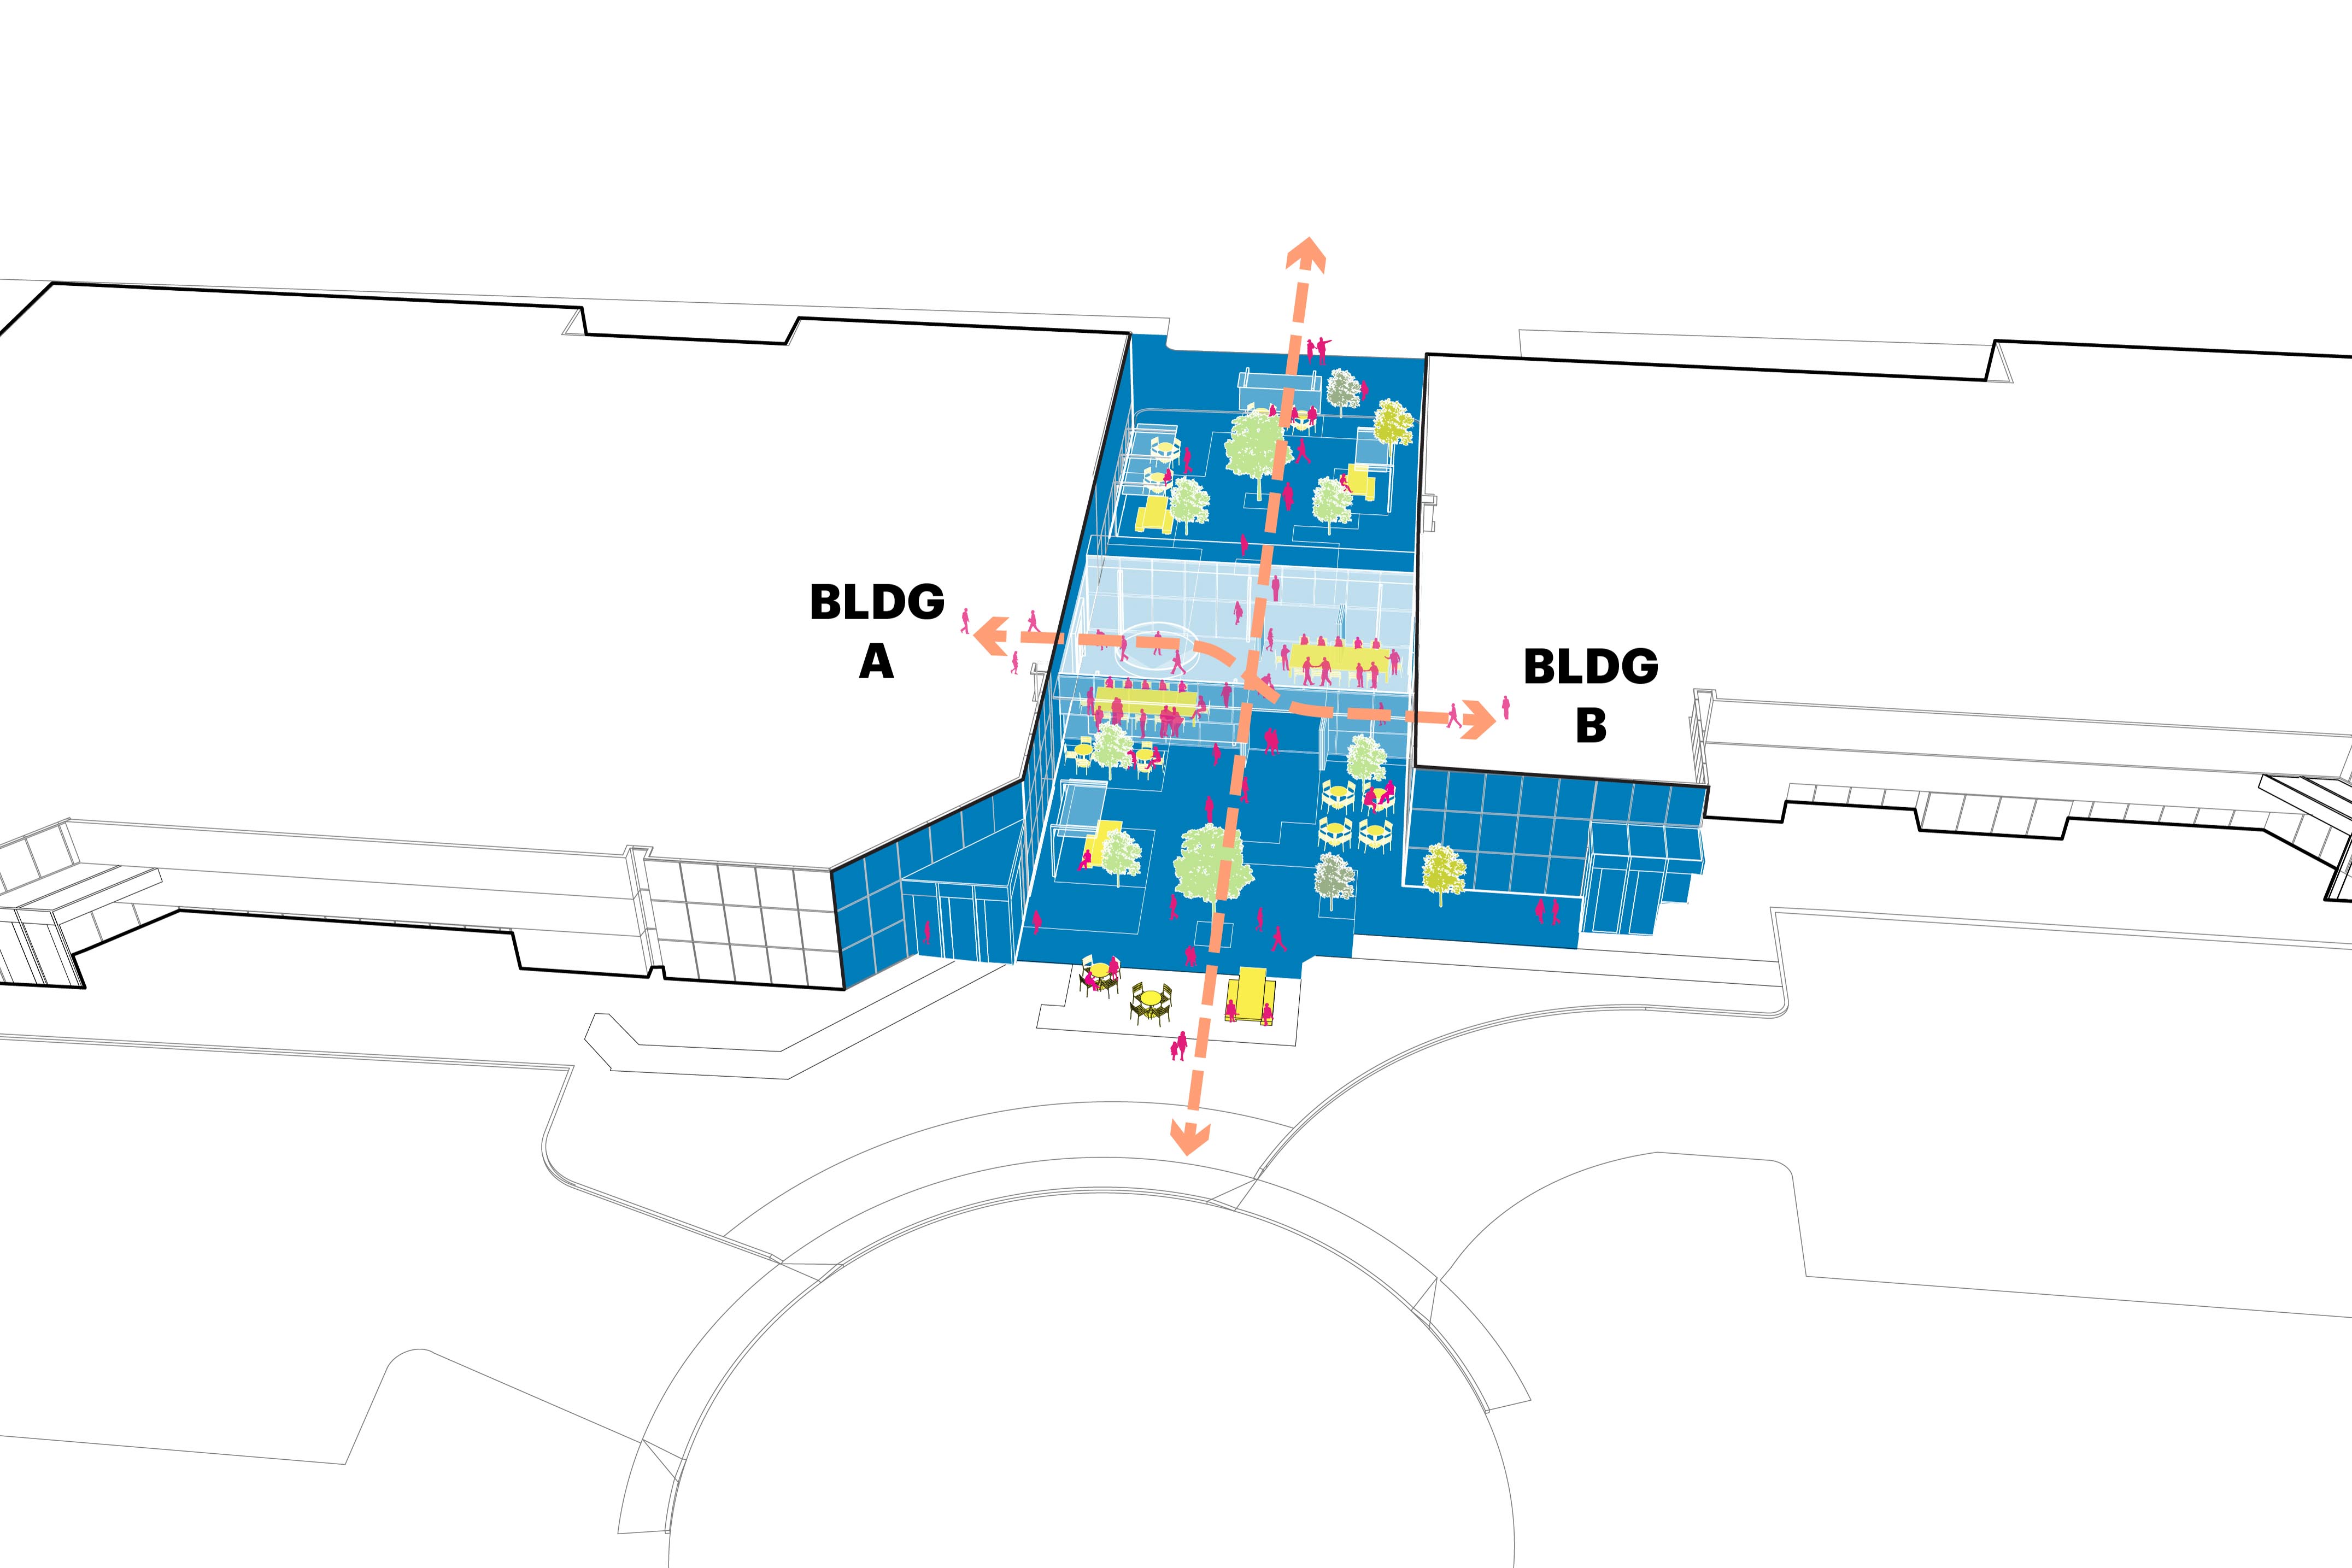 Diagram showing the circulation walkways between buildings A and B